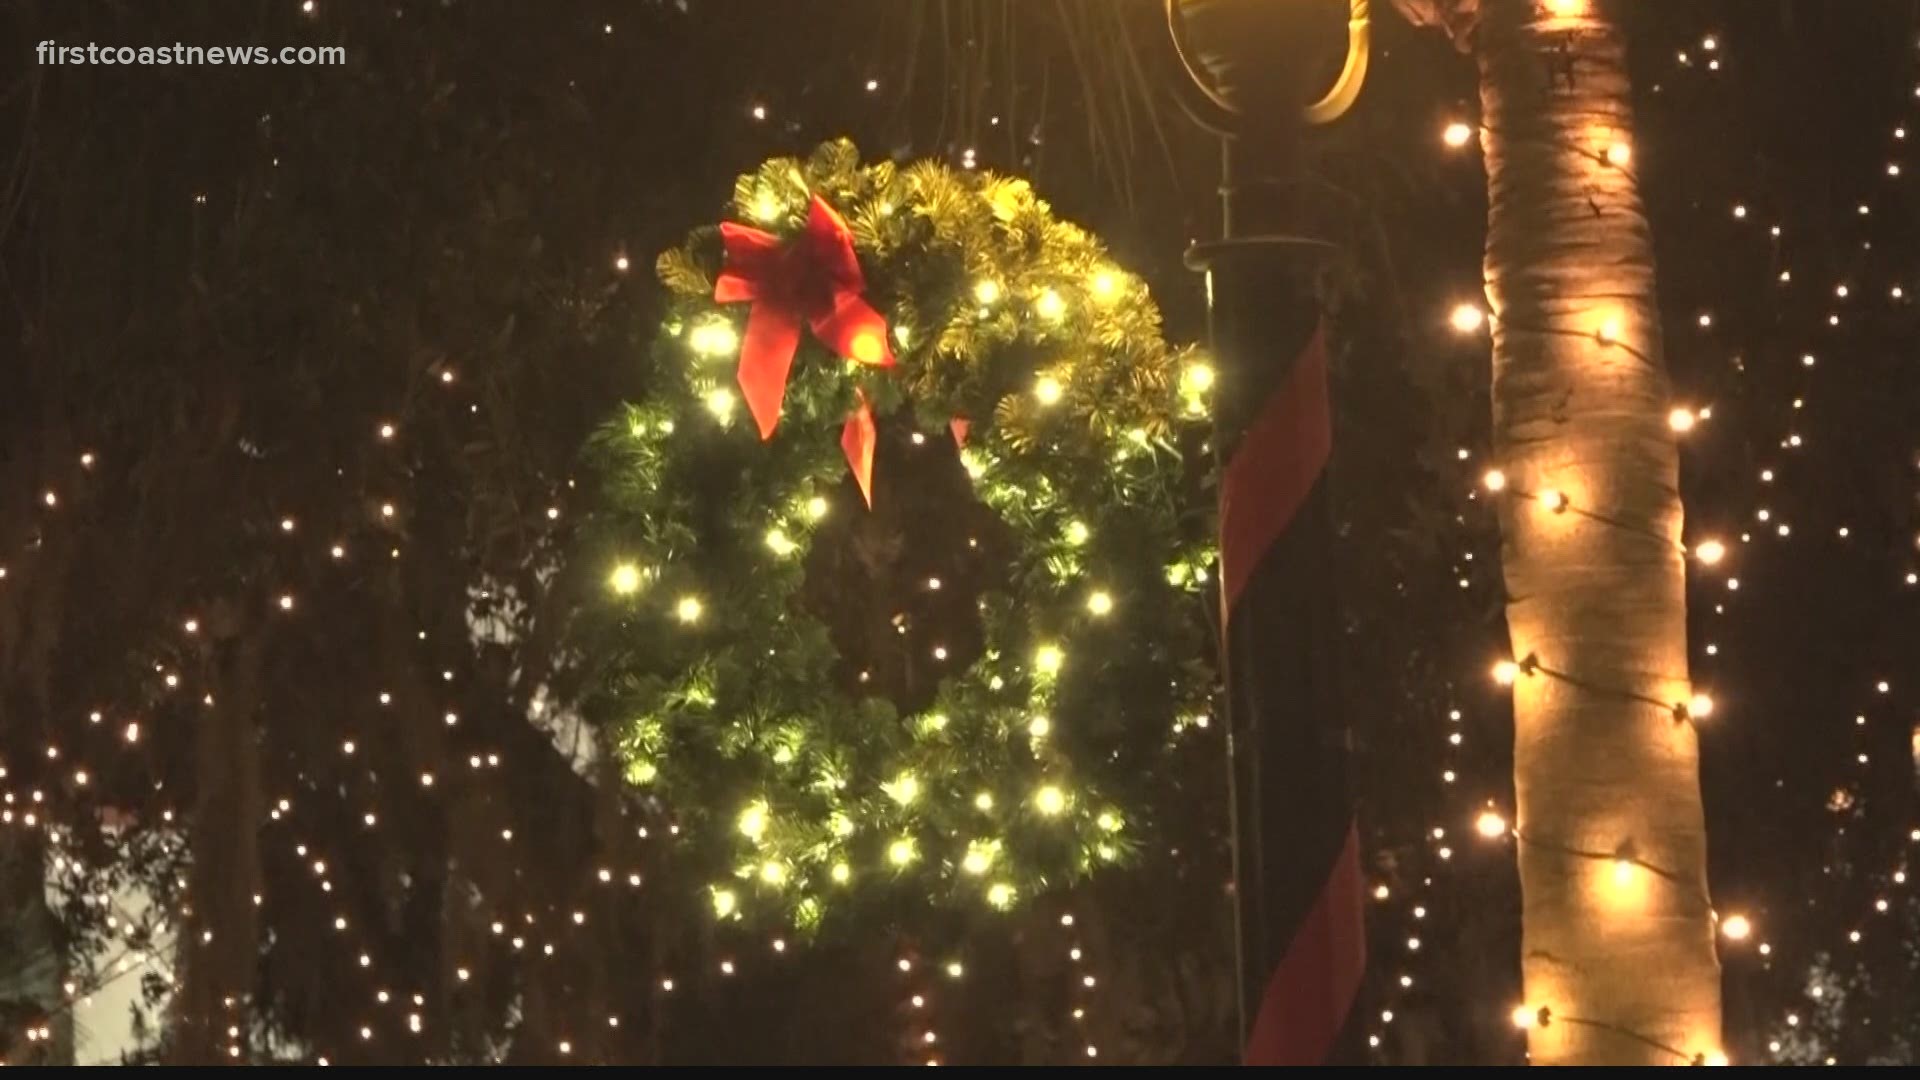 St. Augustine kicked off Nights of Lights one week early, partly to keep crowds down.